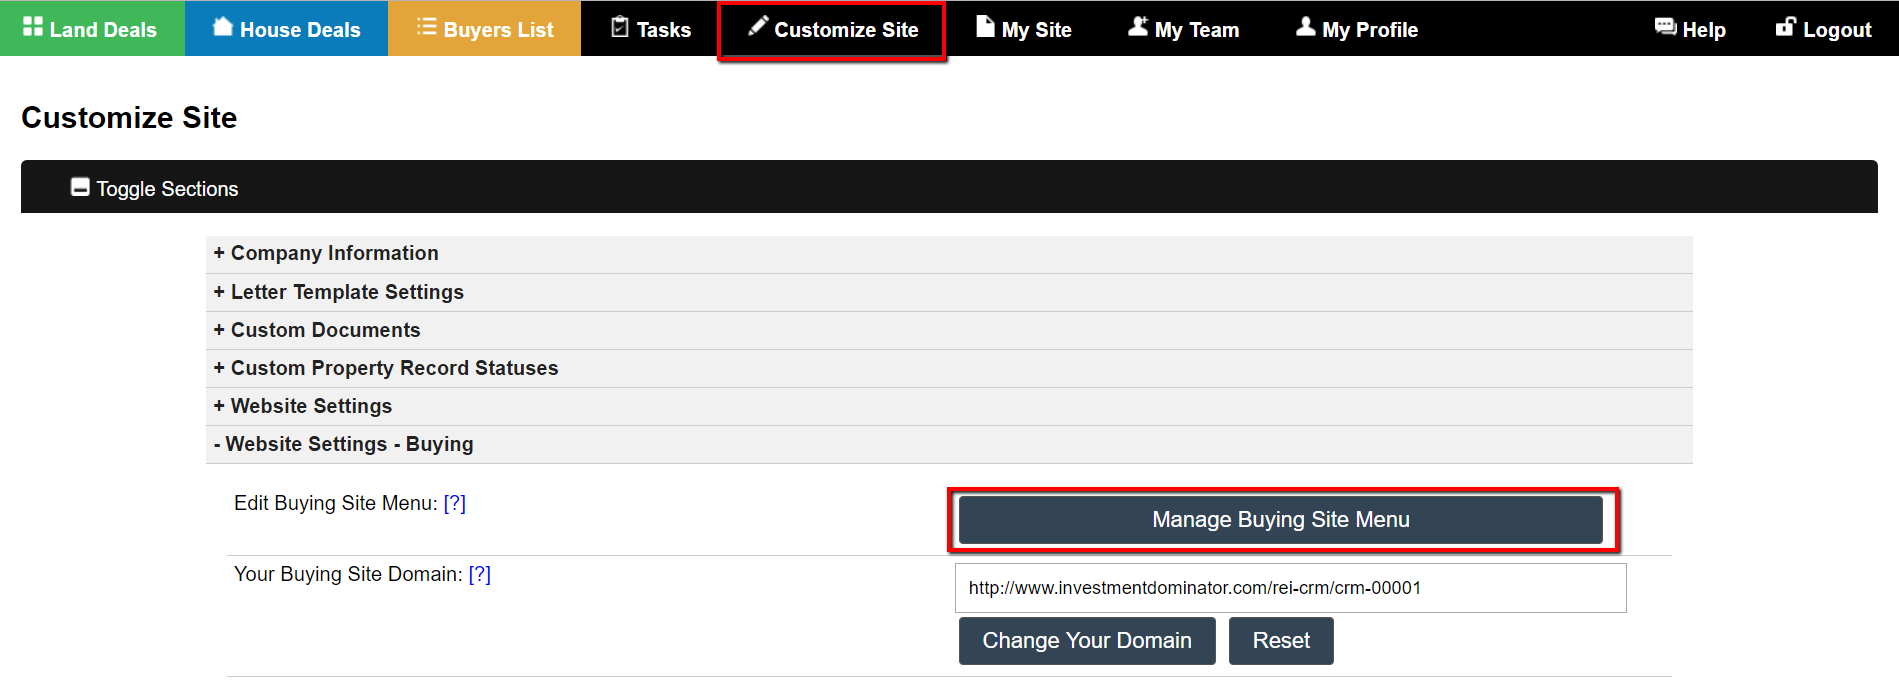 How To Customize The Buying Website Menu